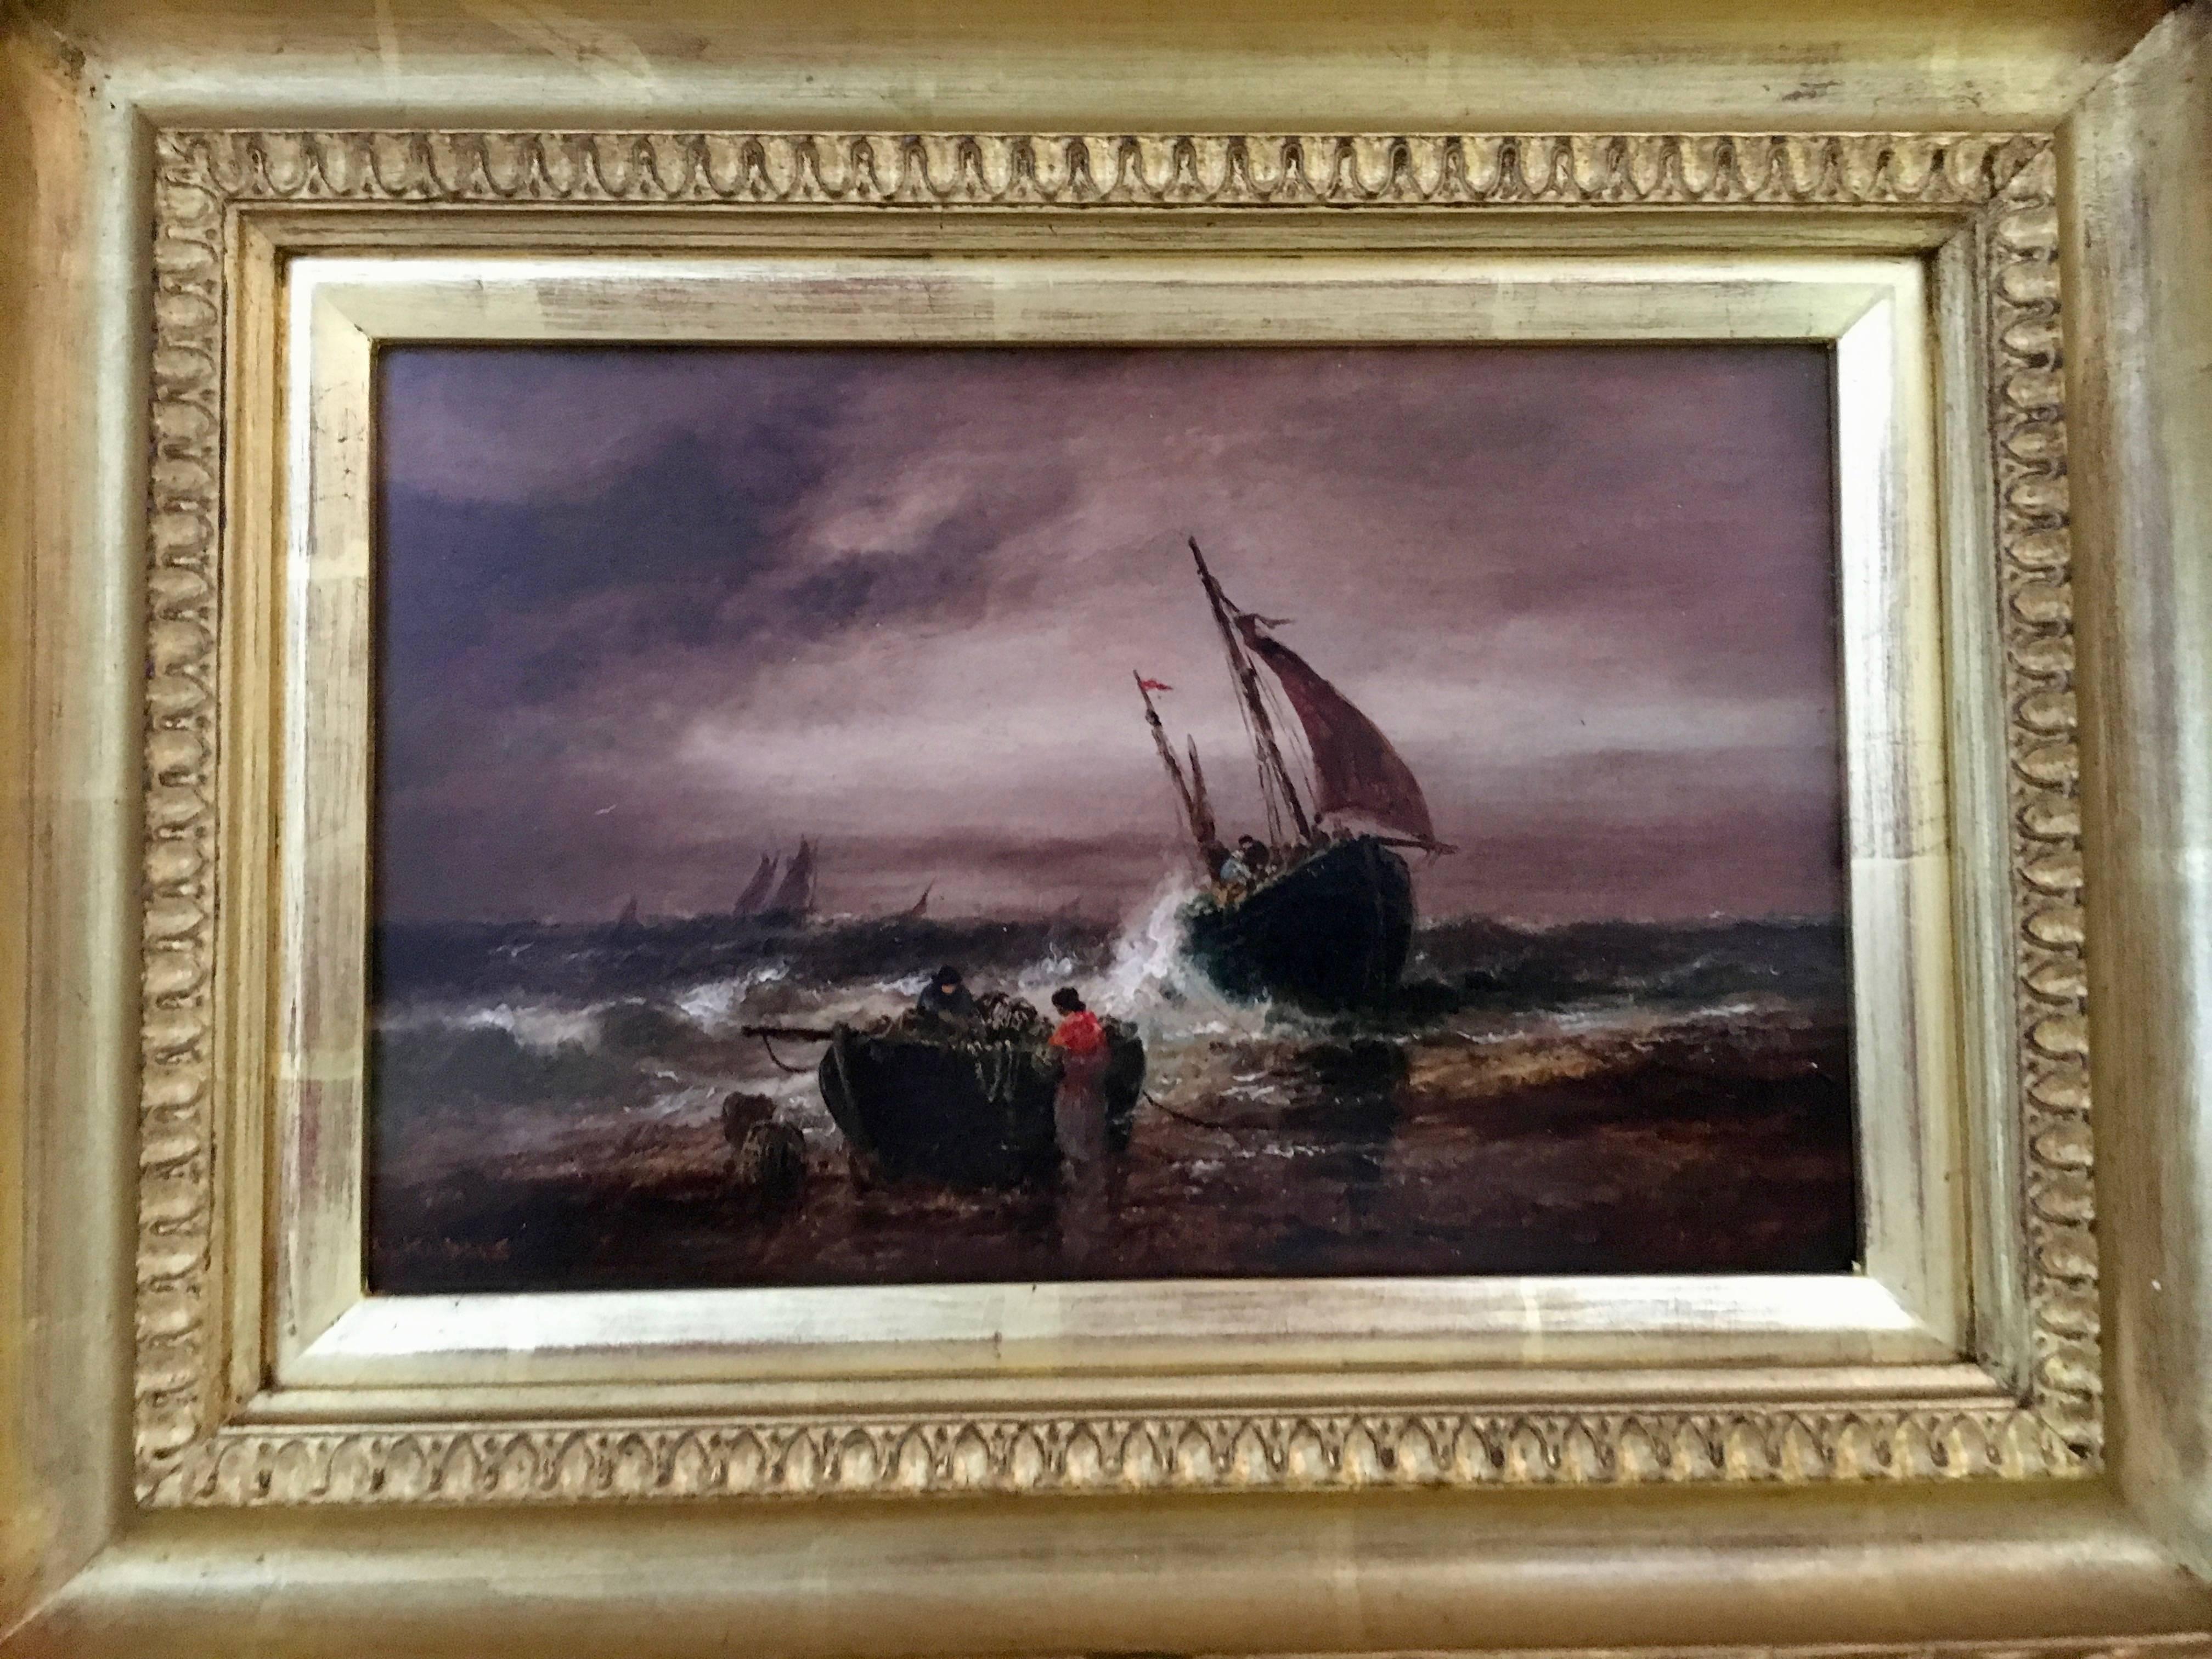 Victorian marine scene of fishing boats in a rough sea - Painting by Sarah Louise Kilpac